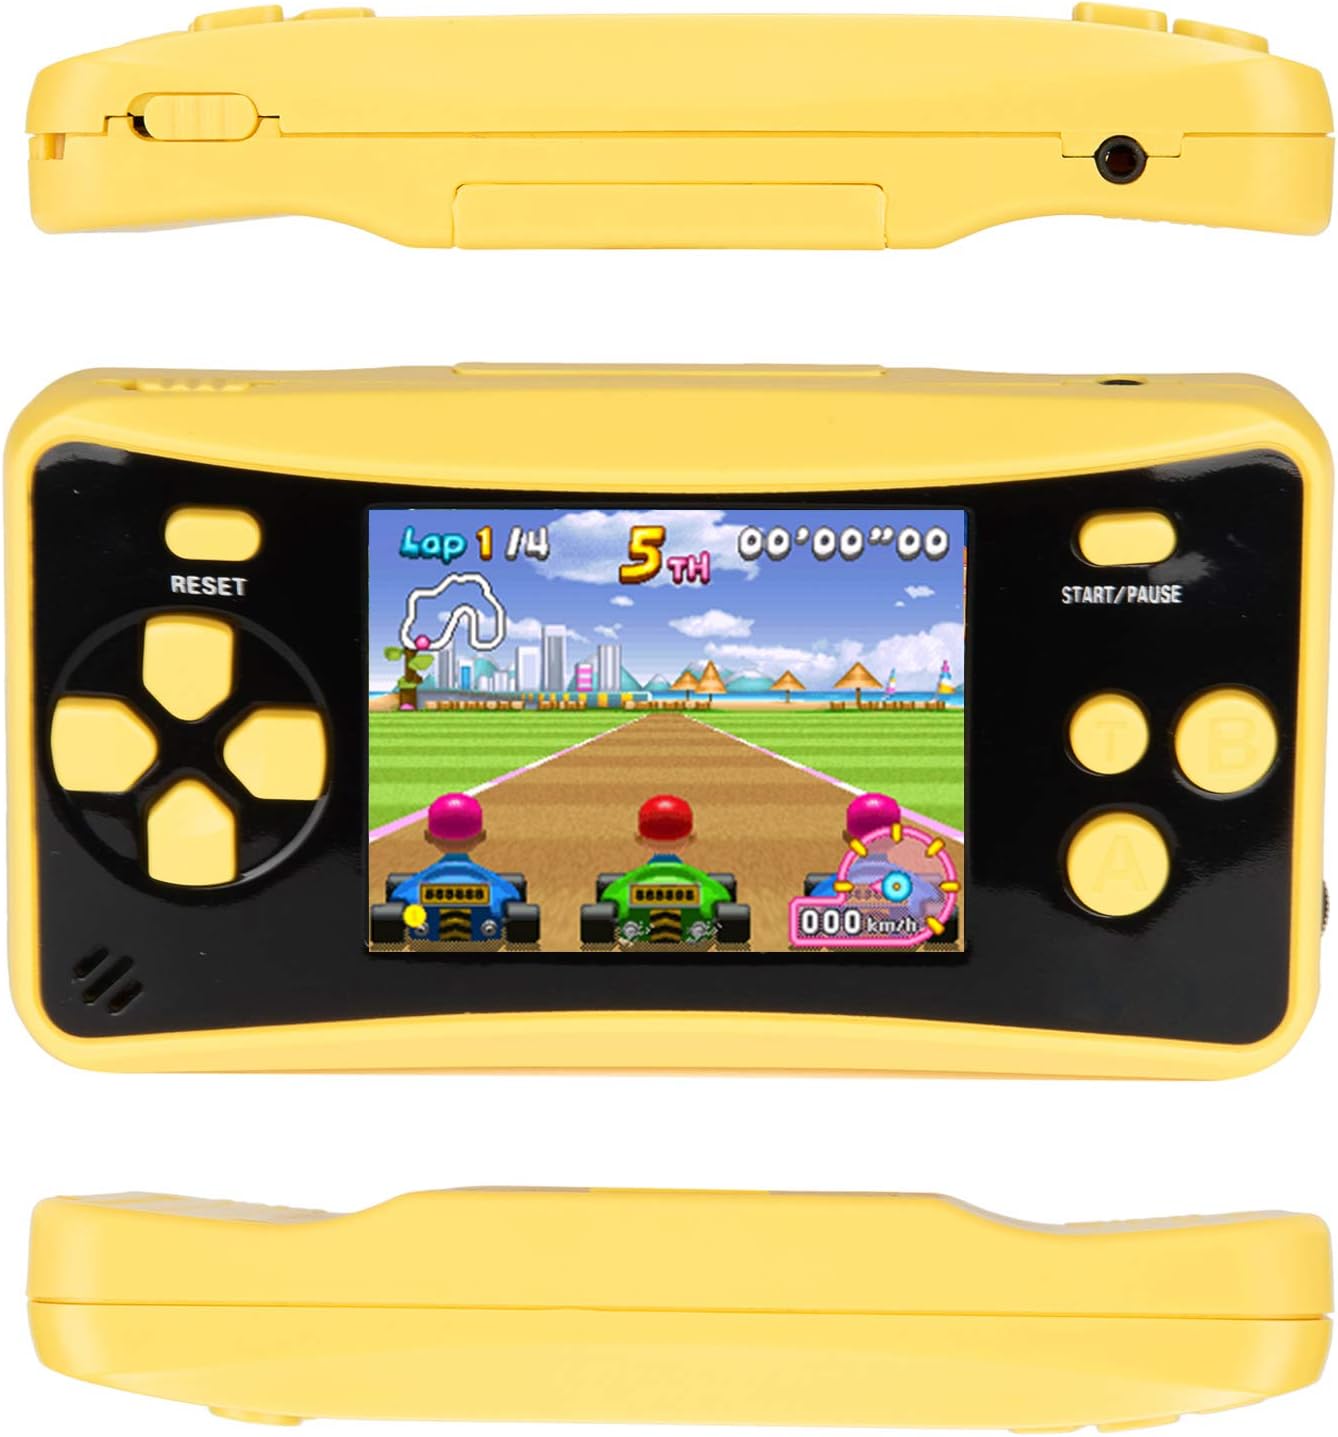 HigoKids Handheld Game for Kids Portable Retro Video Game Player Built-in 182 Classic Games 2.5 inches LCD Screen Family Recreation Arcade Gaming Structure Birthday Present for Children-Rose red